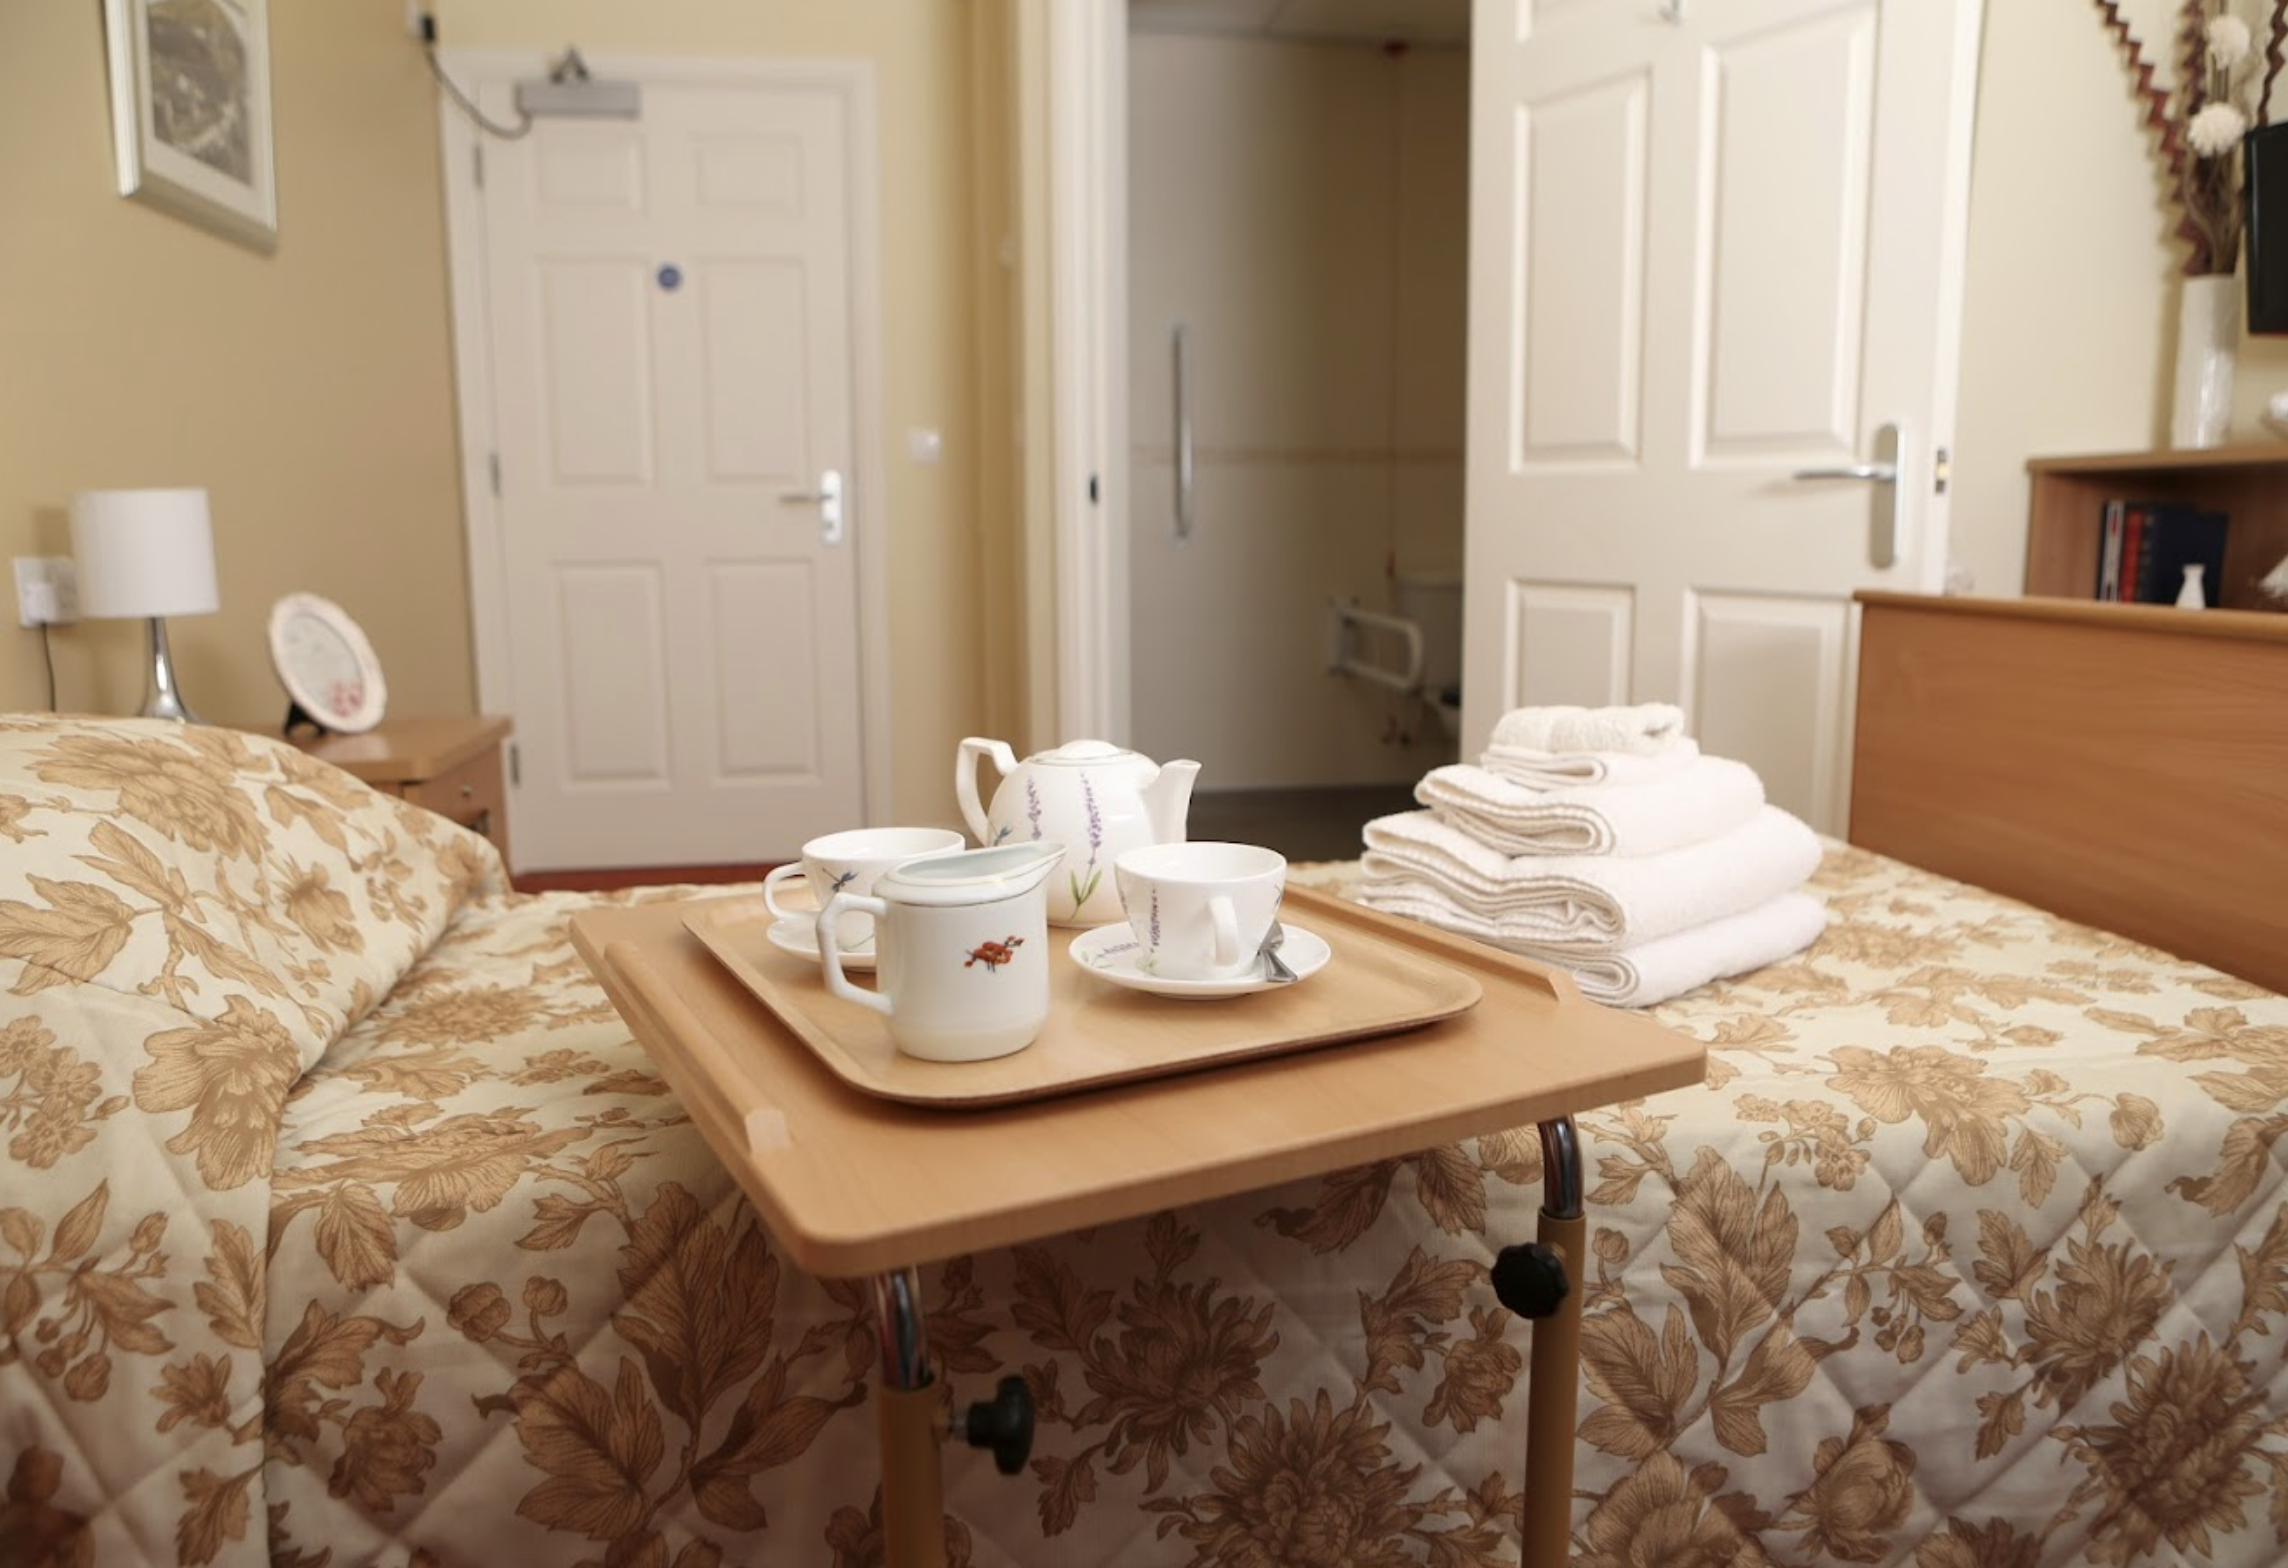 Bedroom of The Springs care home in Malvern, Worcestershire